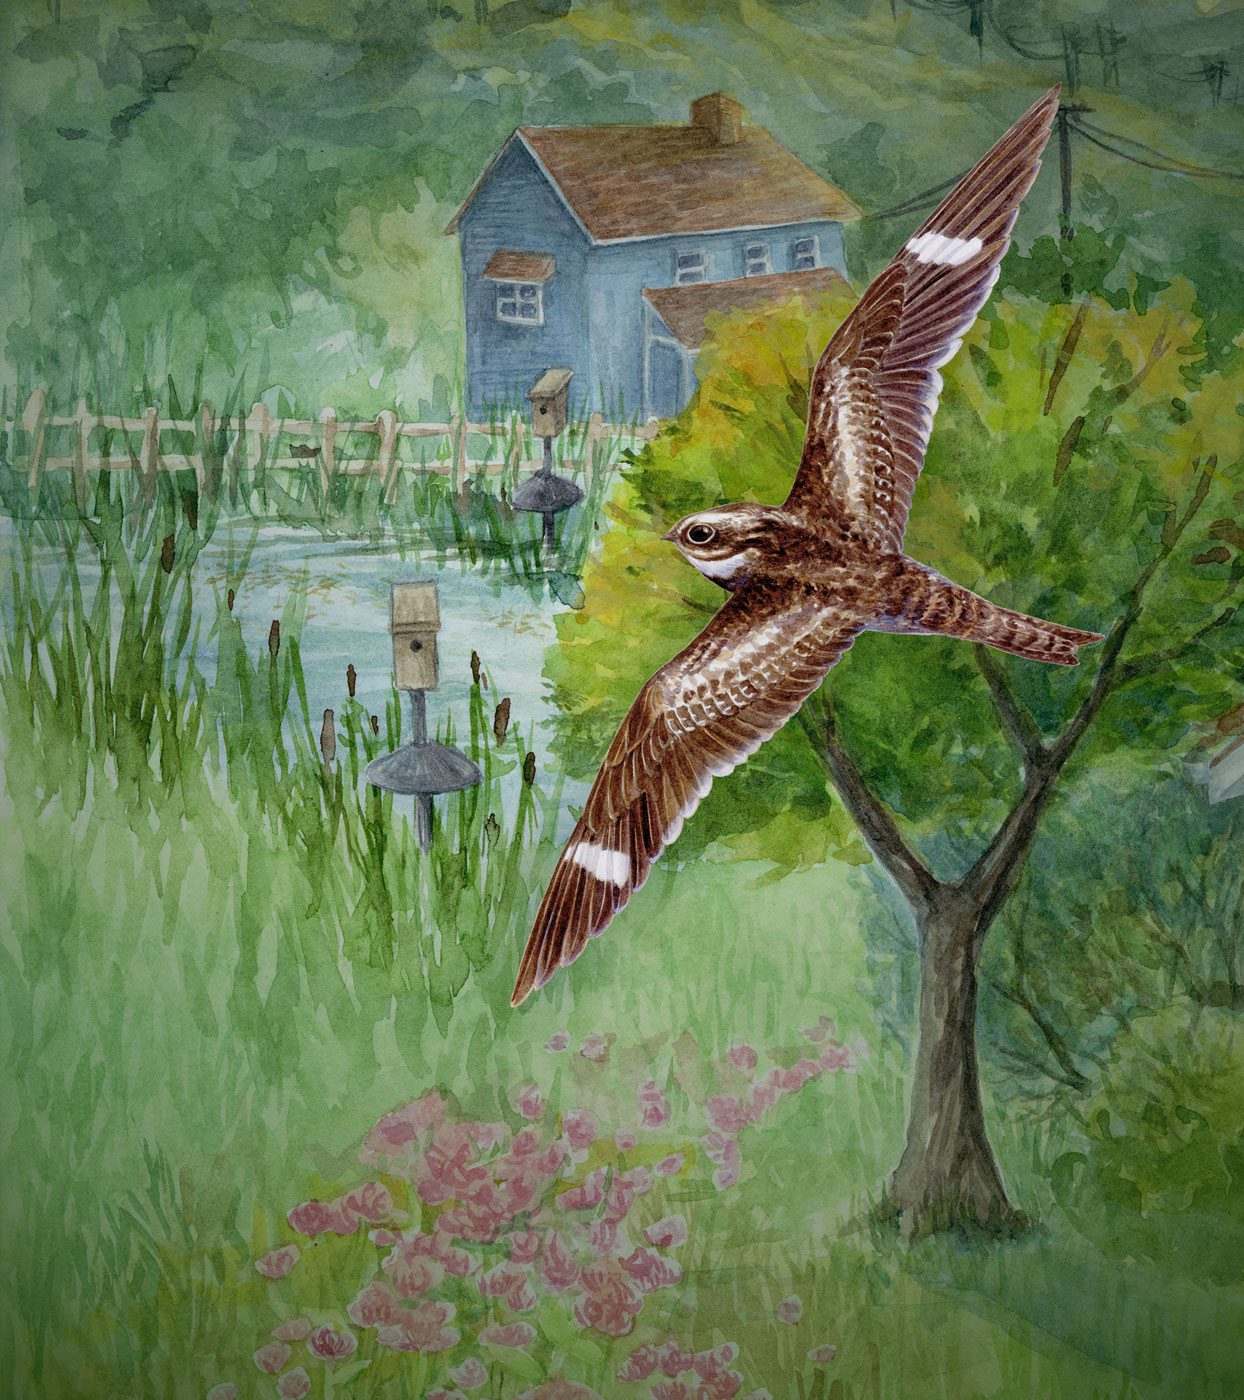 Illustration of a brown and white bird with long, slender, pointed wings and a large eye, flies above flowery fields in the evening light